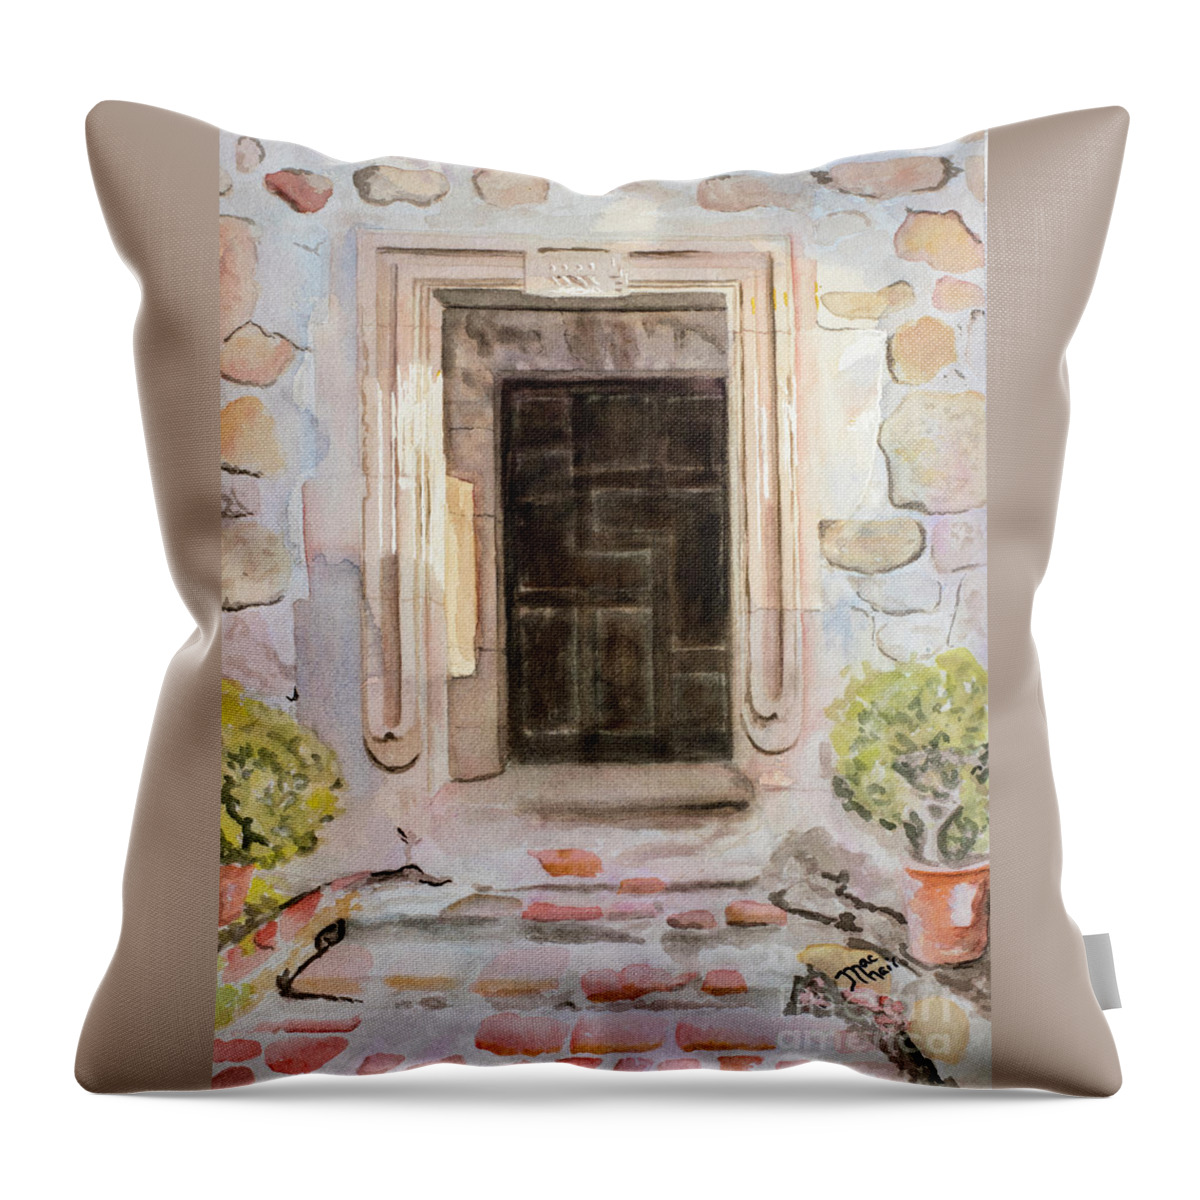 Watercolor Throw Pillow featuring the painting Mission San Juan Capistrano by Jackie MacNair